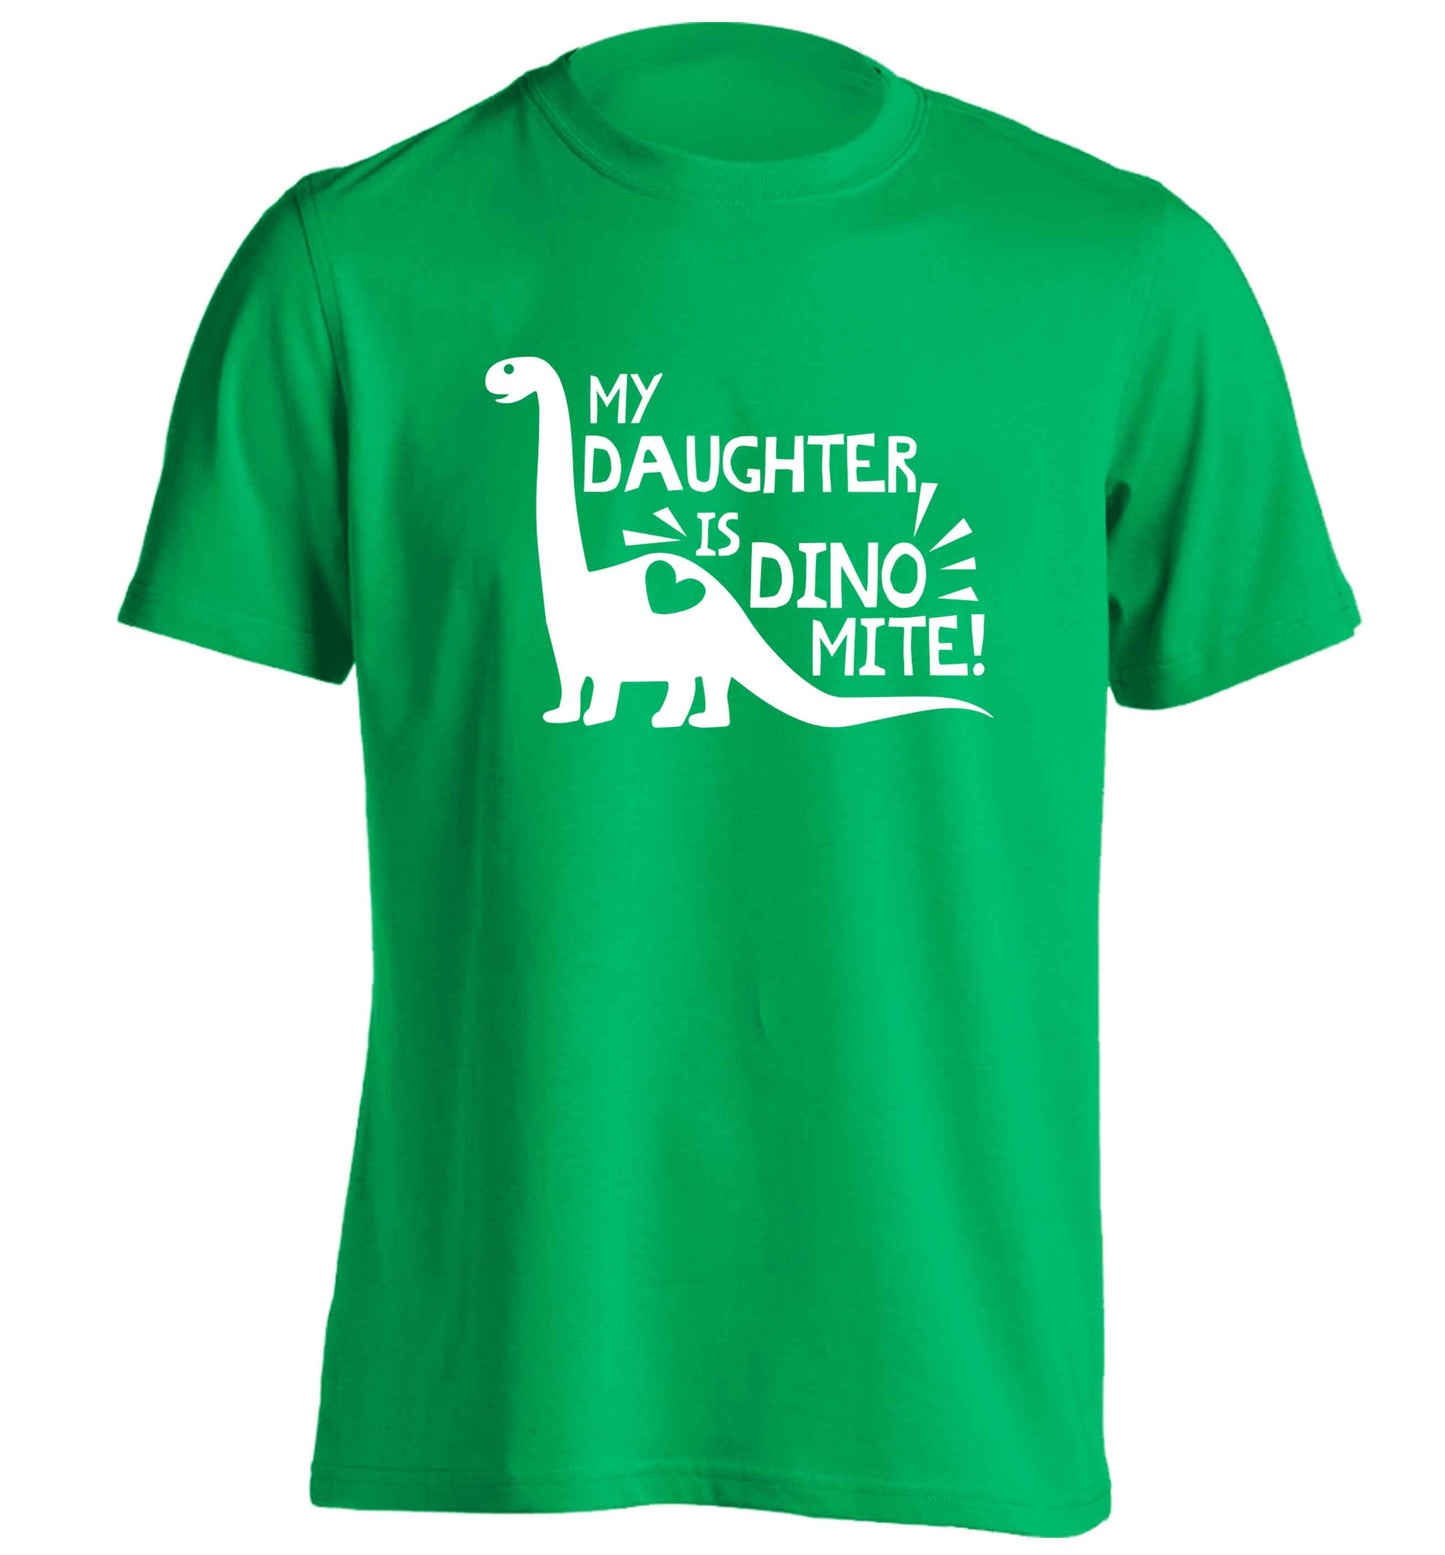 My daughter is dinomite! adults unisex green Tshirt 2XL